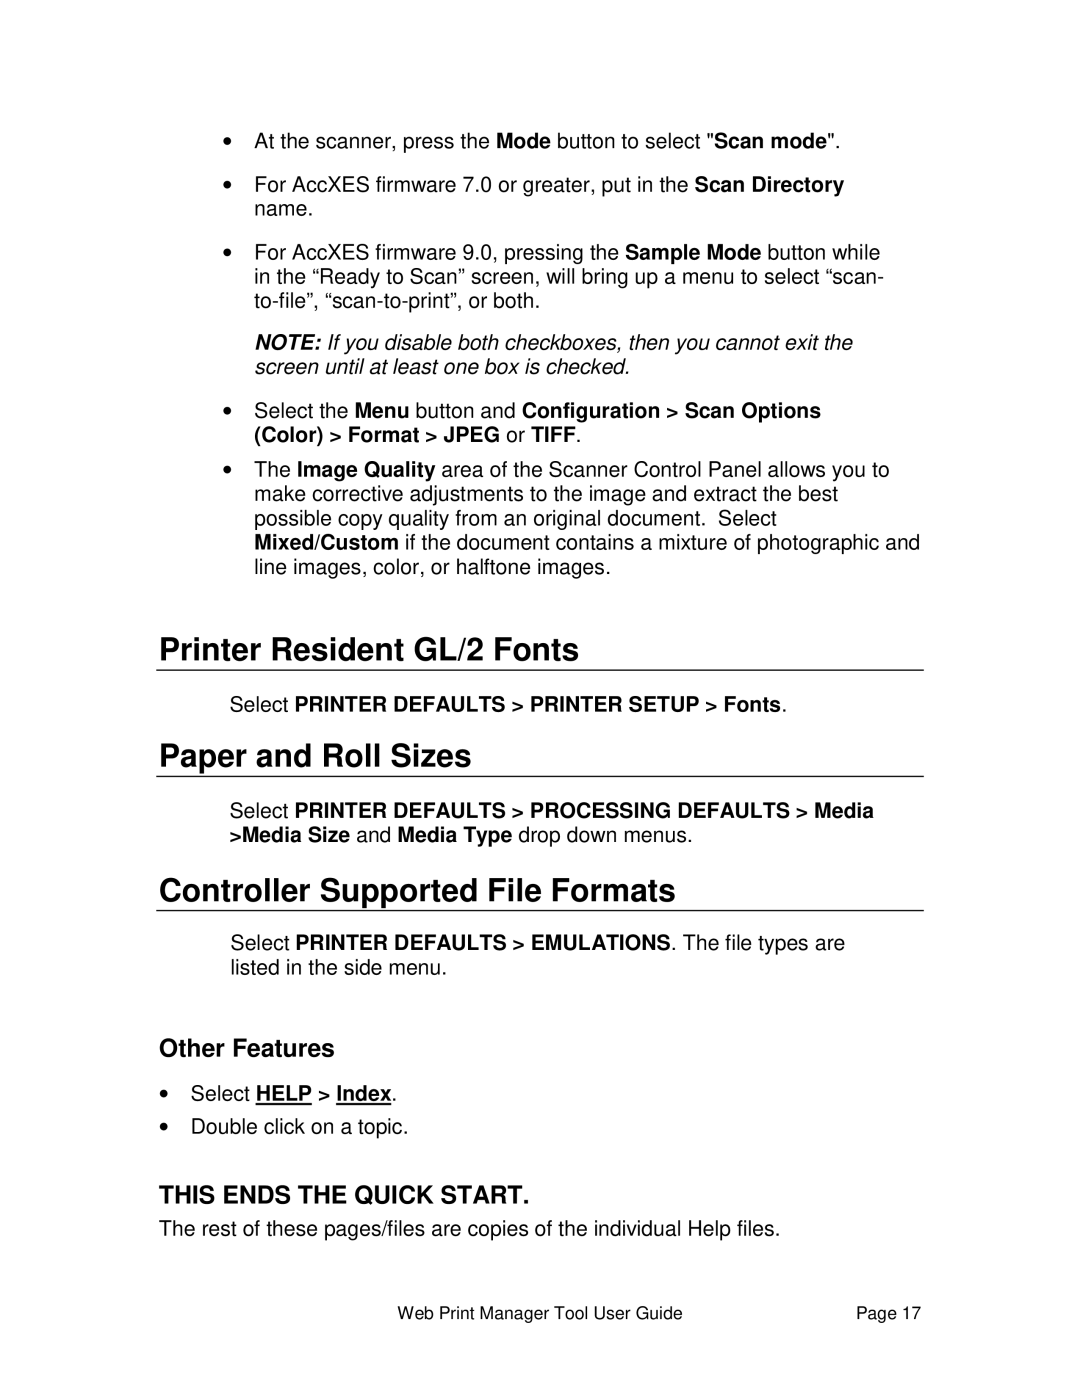 Xerox 701P39116 Printer Resident GL/2 Fonts, Paper and Roll Sizes, Controller Supported File Formats, Select Help Index 